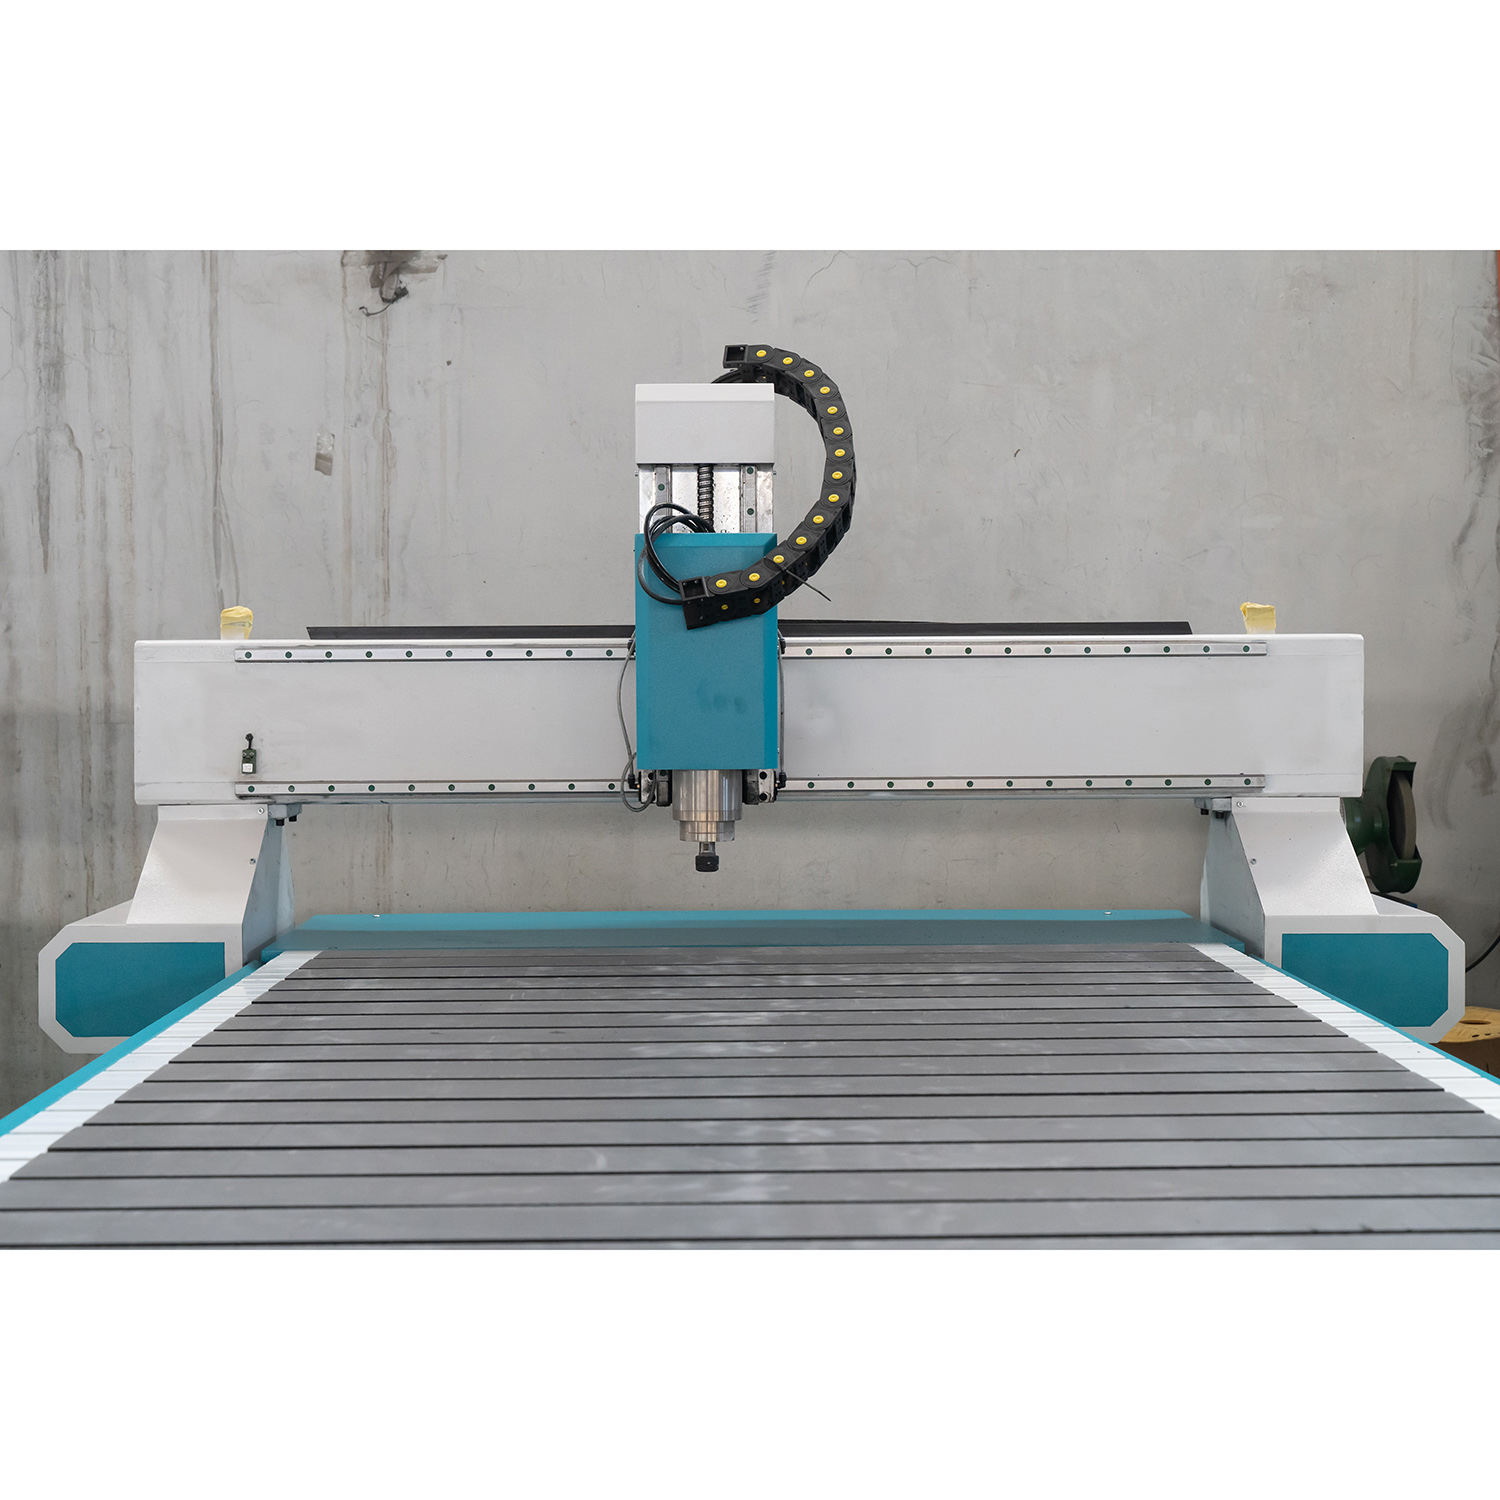 3 Axis CNC Router Wood Carving Machine for MDF Kitchen Cabinet Furniture Featured Image